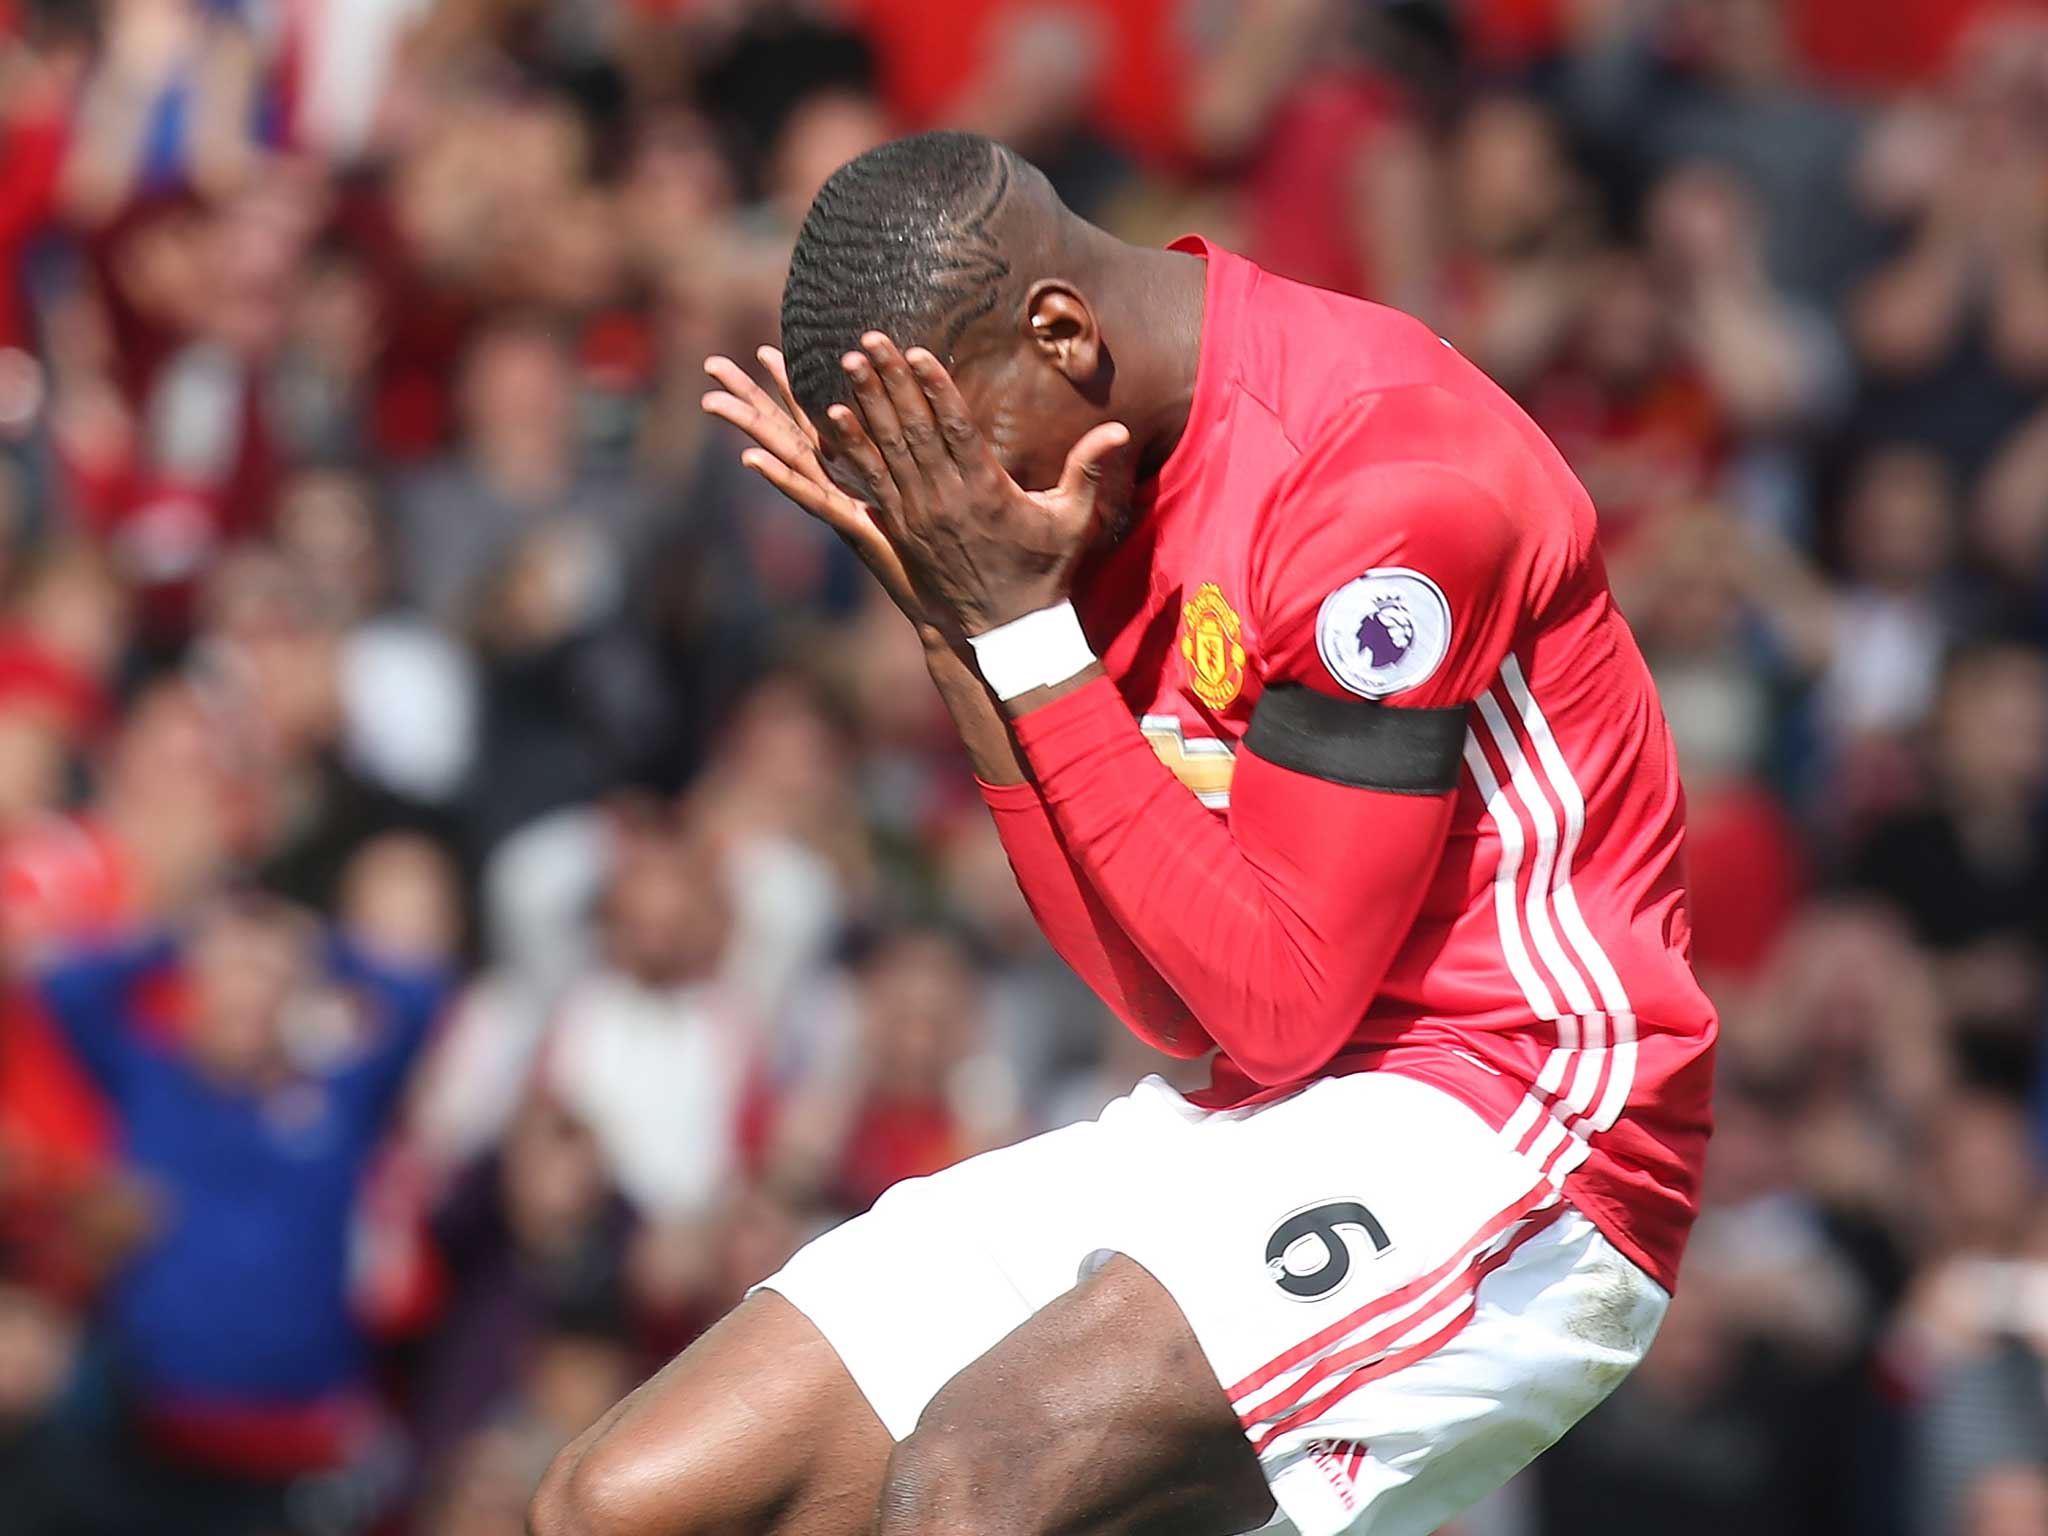 Paul Pogba has been among the biggest culprits for missed chances